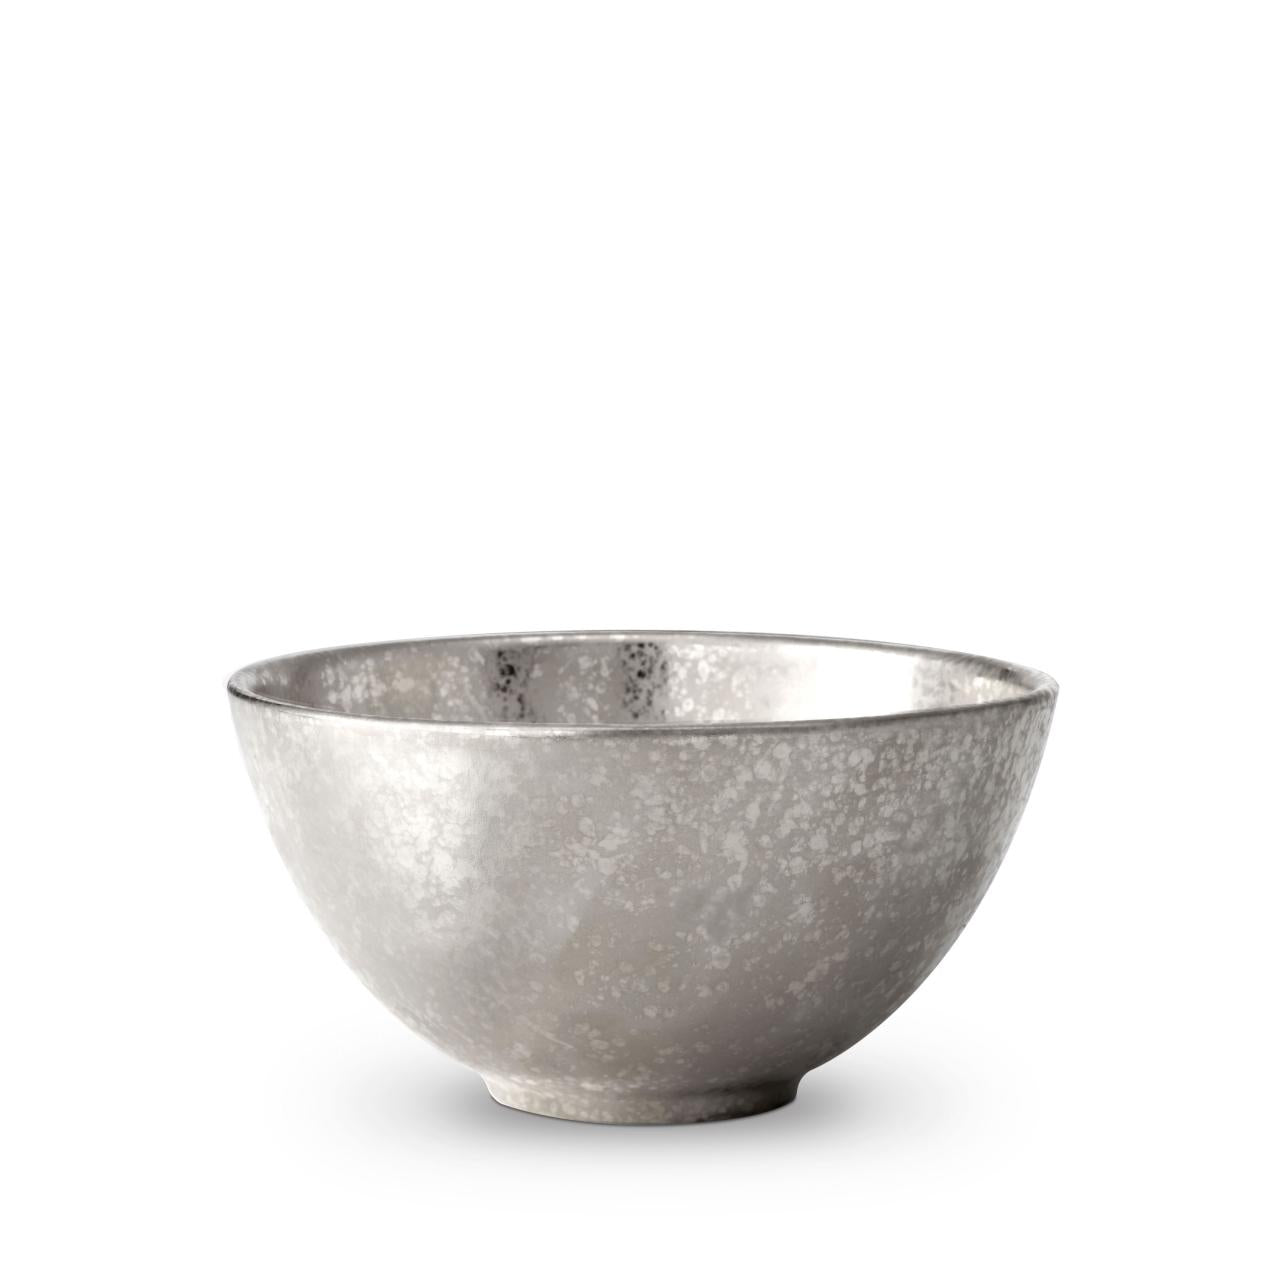 Alchimie Cereal Bowl - RSVP Style